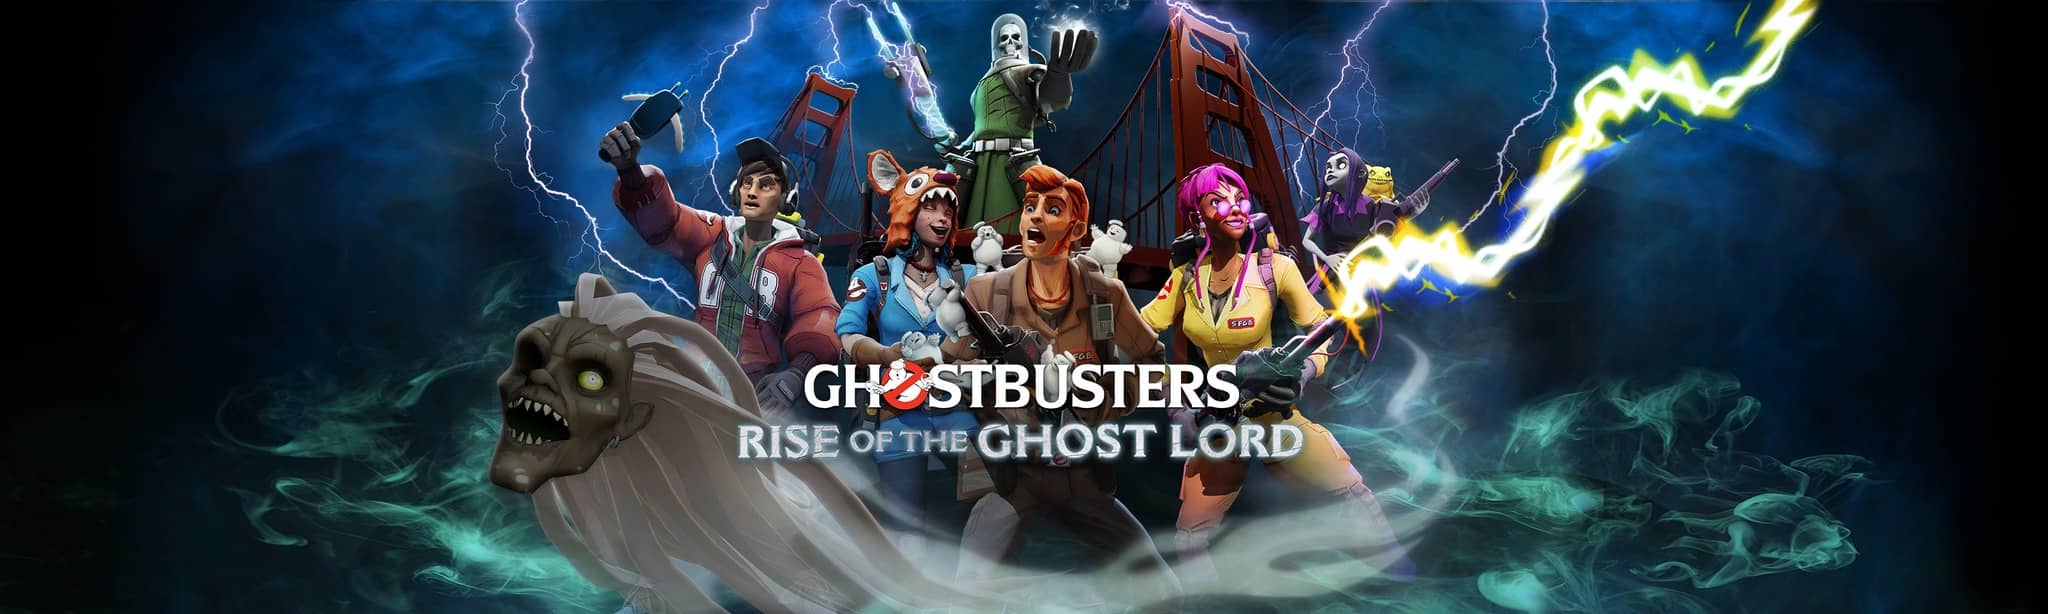 Ghostbusters Rise of the Ghost Lord - úvod